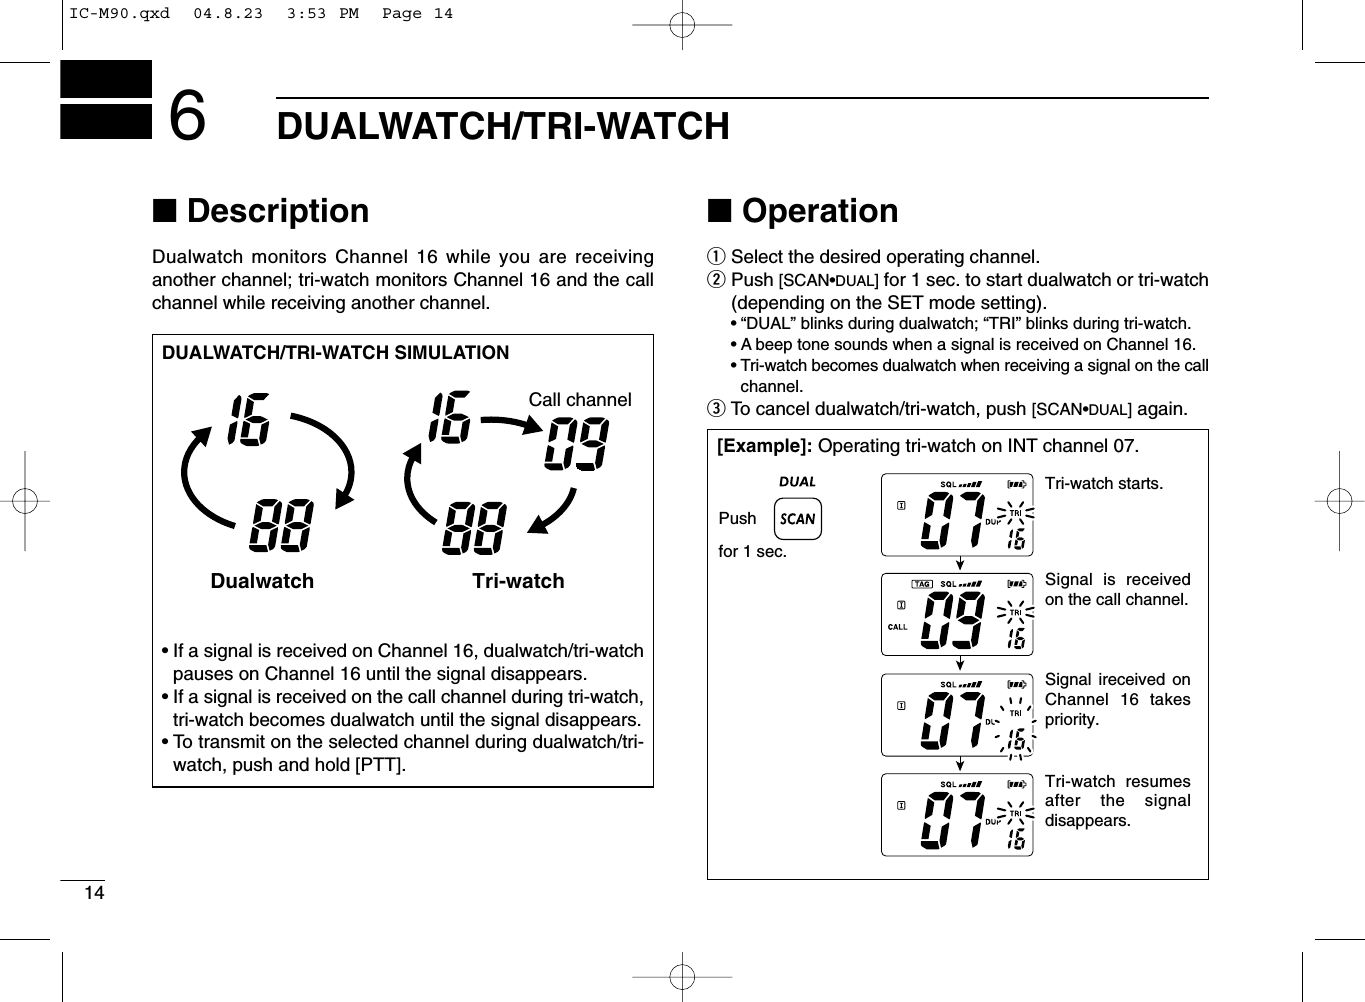 14DUALWATCH/TRI-WATCH6■DescriptionDualwatch monitors Channel 16 while you are receiving another channel; tri-watch monitors Channel 16 and the callchannel while receiving another channel.■OperationqSelect the desired operating channel.wPush [SCAN•DUAL]for 1 sec. to start dualwatch or tri-watch(depending on the SET mode setting).•“DUAL” blinks during dualwatch; “TRI” blinks during tri-watch.•A beep tone sounds when a signal is received on Channel 16.•Tri-watch becomes dualwatch when receiving a signal on the callchannel.eTo cancel dualwatch/tri-watch, push [SCAN•DUAL]again.DUALWATCH/TRI-WATCH SIMULATION•If a signal is received on Channel 16, dualwatch/tri-watchpauses on Channel 16 until the signal disappears.•If a signal is received on the call channel during tri-watch,tri-watch becomes dualwatch until the signal disappears.•To transmit on the selected channel during dualwatch/tri-watch, push and hold [PTT].Dualwatch Tri-watchCall channel[Example]: Operating tri-watch on INT channel 07.Pushfor 1 sec.Signal is received on the call channel.Signal ireceived on Channel 16 takes priority.Tri-watch resumes after the signal disappears.Tri-watch starts.IC-M90.qxd  04.8.23  3:53 PM  Page 14